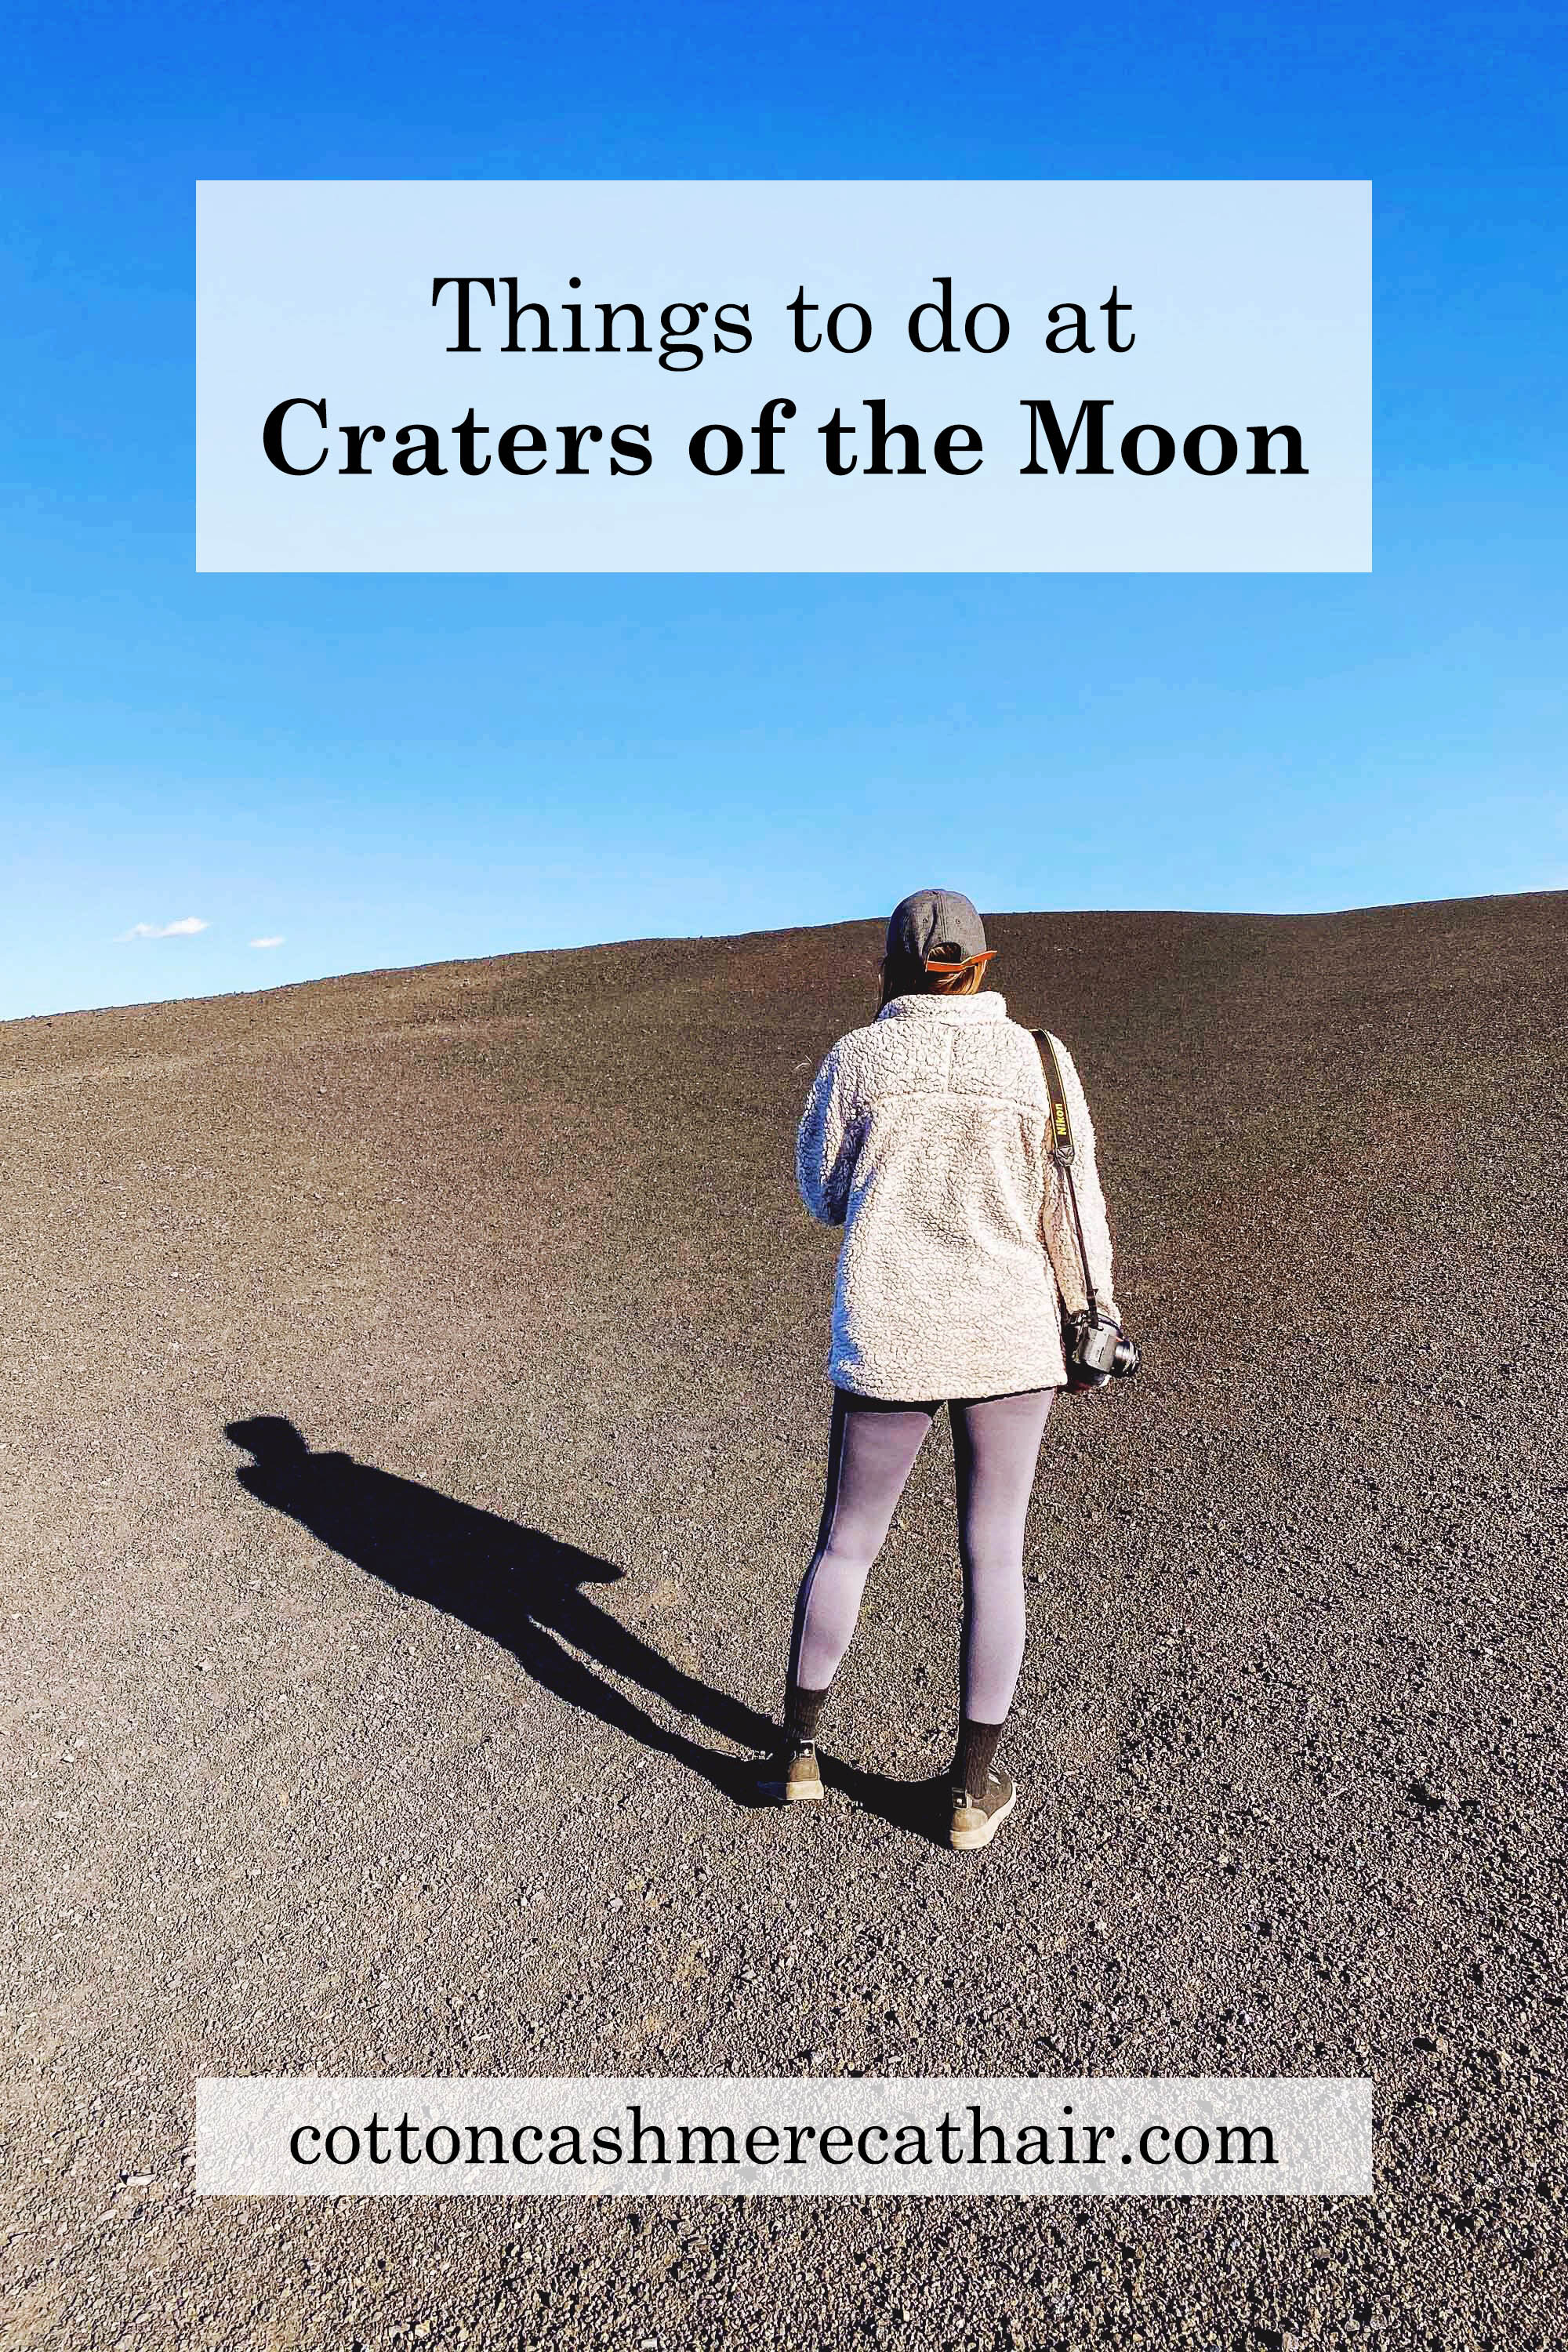 Things to do at Craters of the Moon National Monument